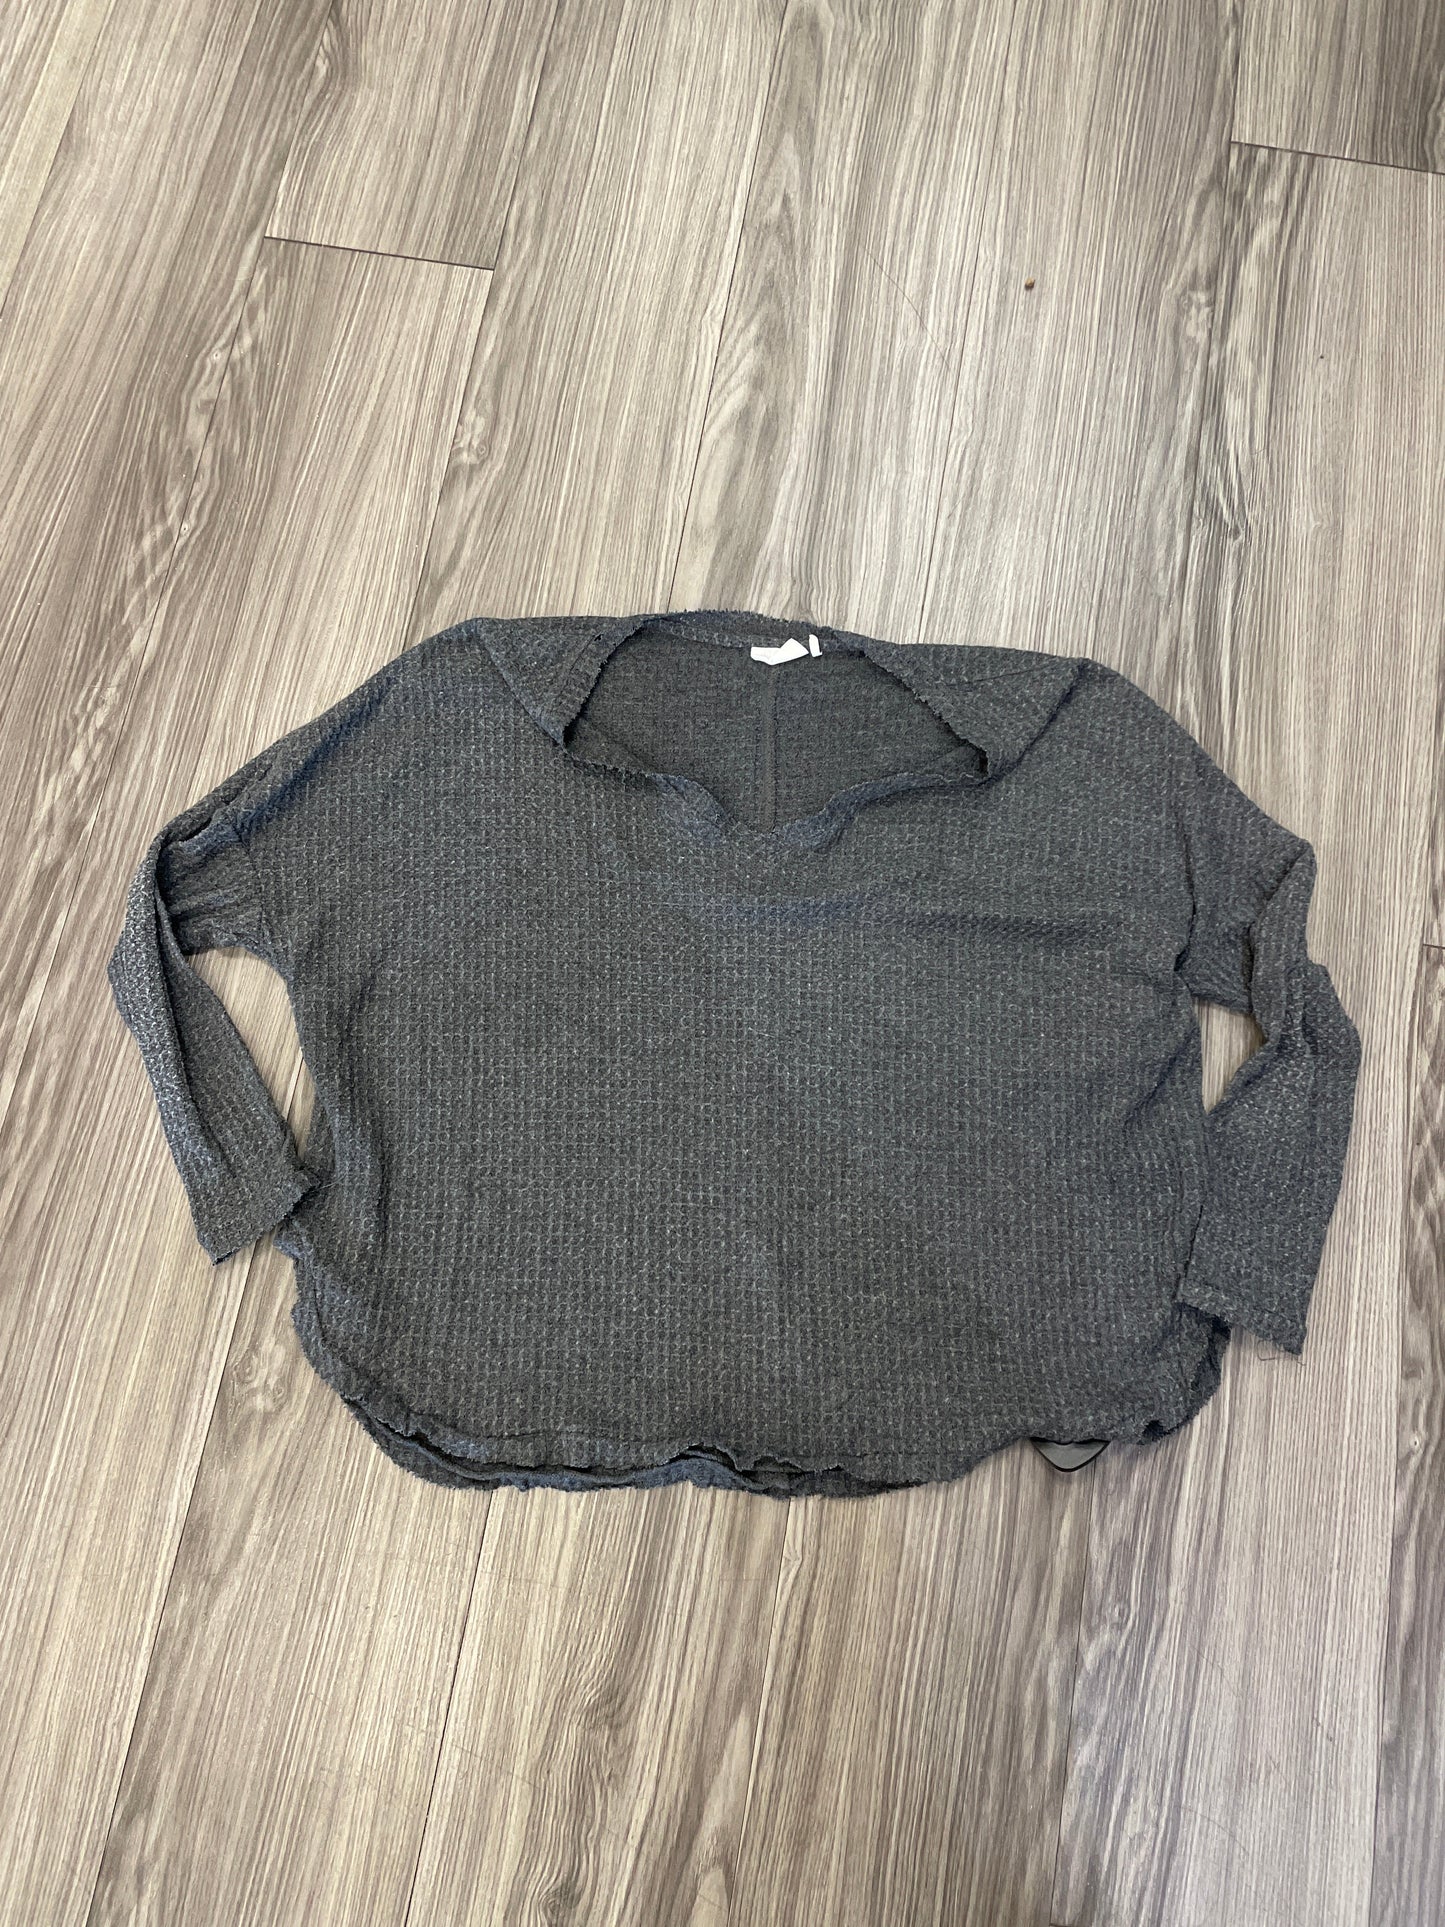 Grey Top Long Sleeve Clothes Mentor, Size Xs